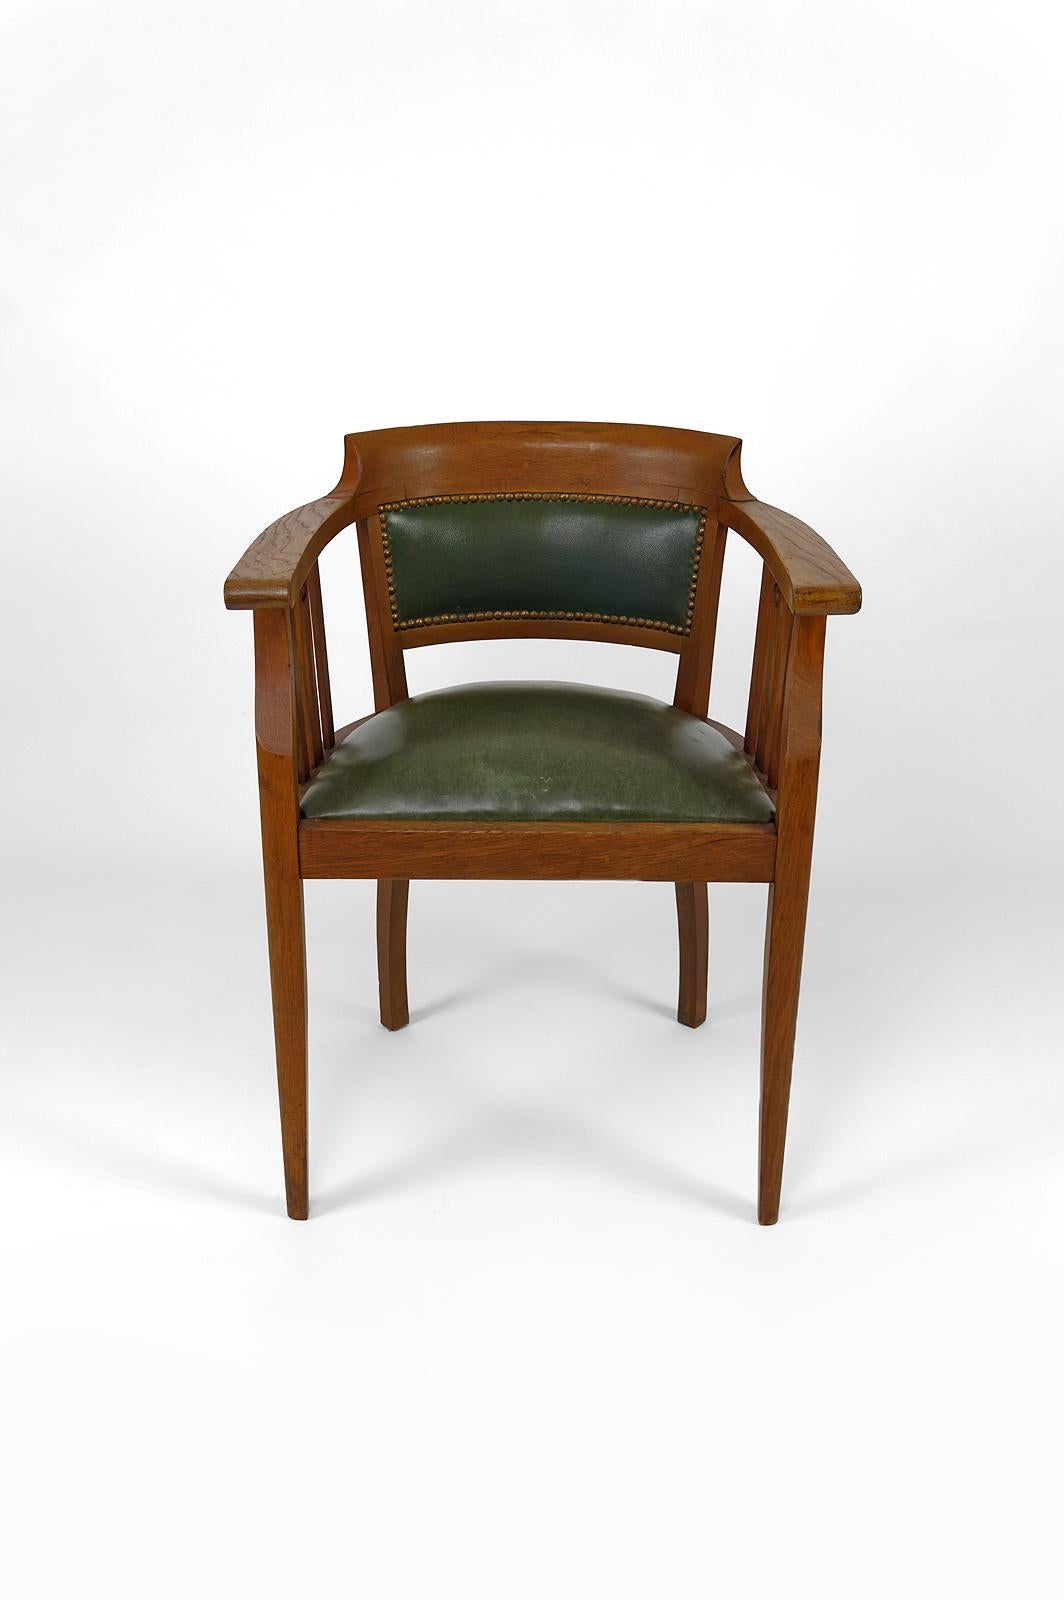 Elegant office / desk armchair in oak with seat and backrest in imitation leather / dark green leatherette.

Art Nouveau / Jugendstil, Germany or Austria, cica 1910-1920.

In good condition.

Dimensions:
Height 80cm
Width 60cm
Depth